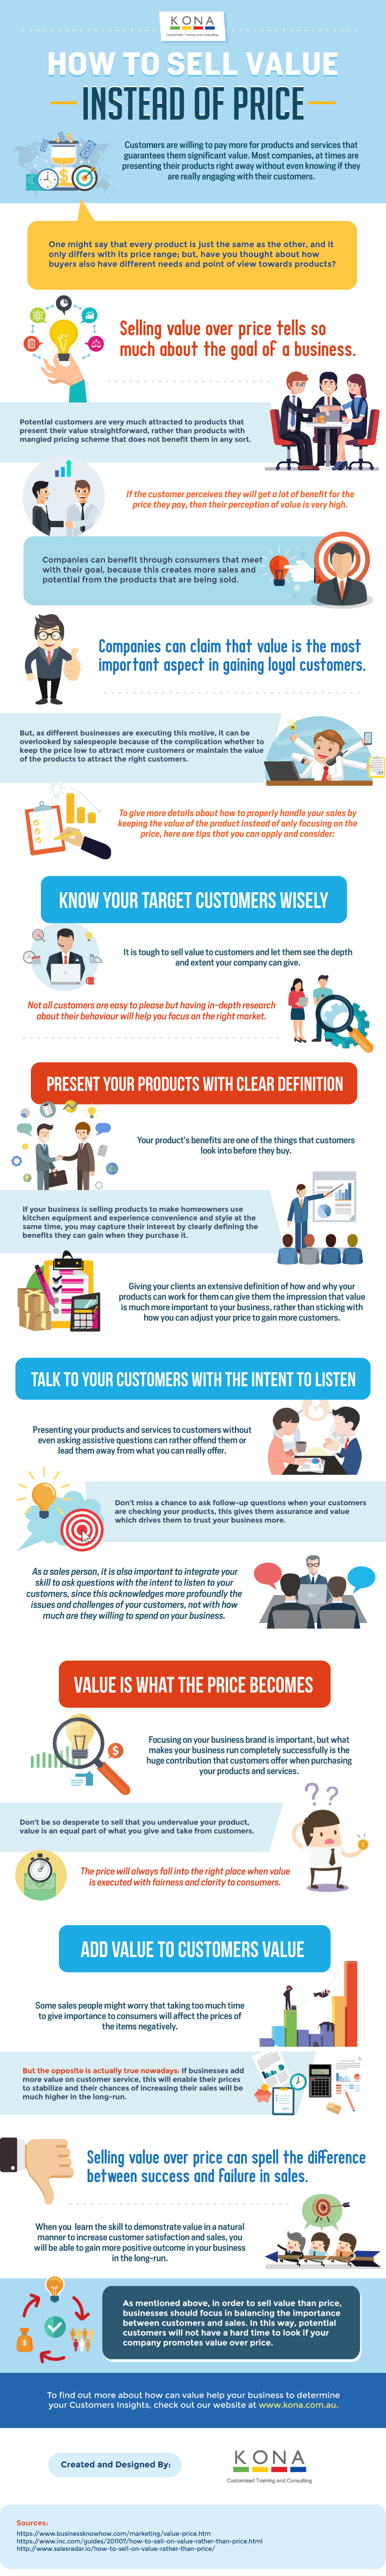 How to Sell Value Instead of Price - Infographic